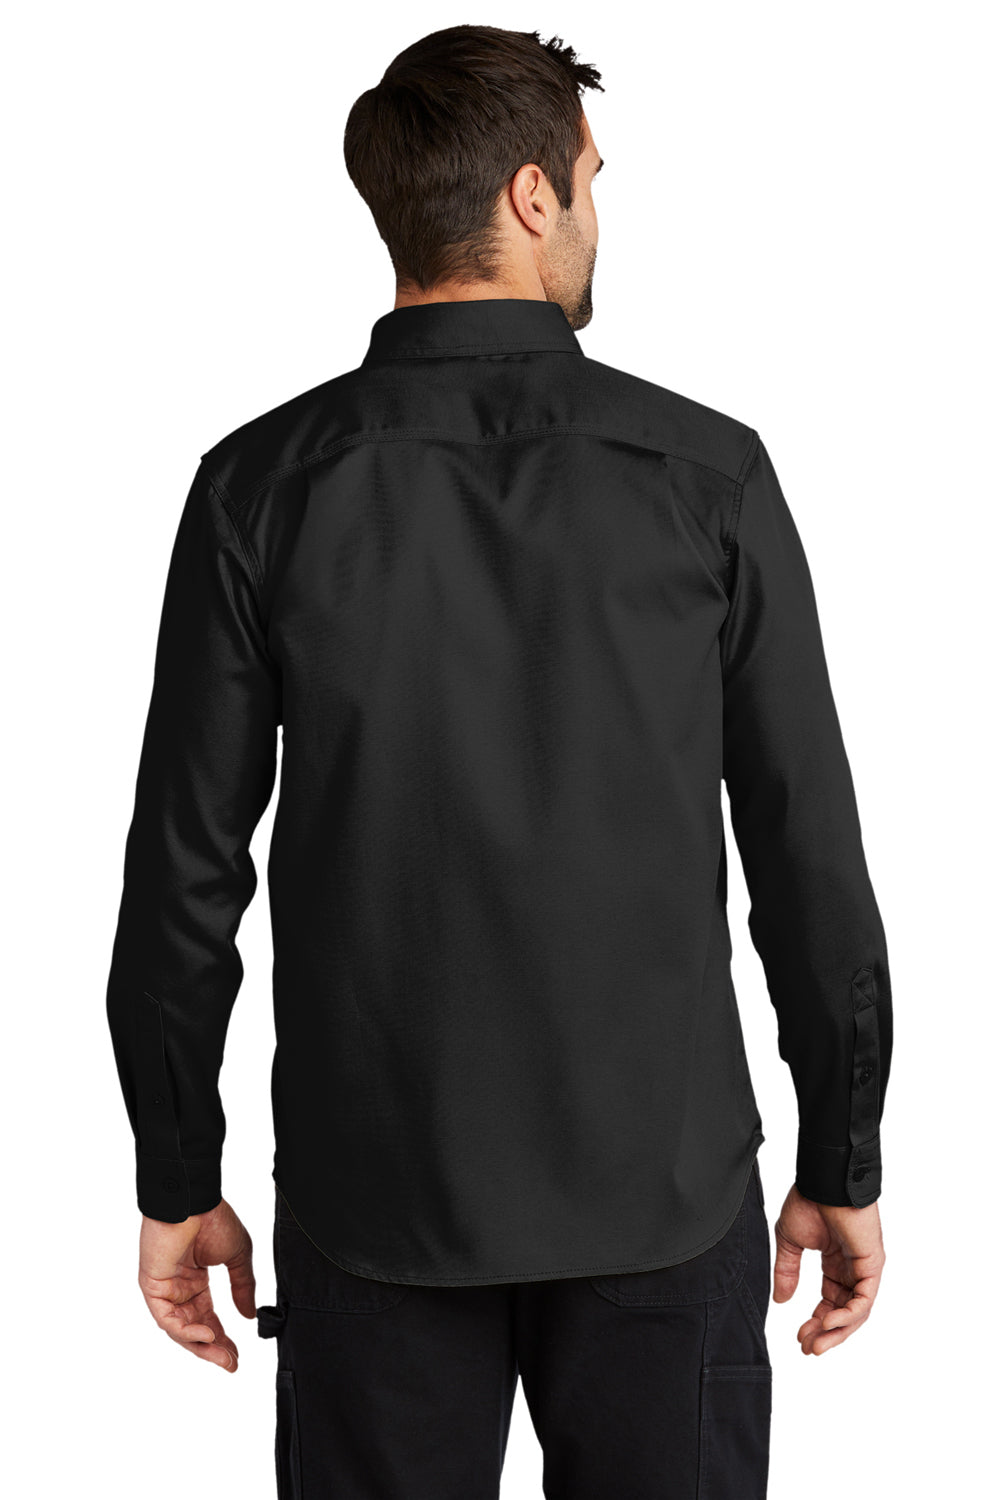 Carhartt CT102538 Mens Rugged Professional Series Wrinkle Resistant Long Sleeve Button Down Shirt w/ Pocket Black Model Back